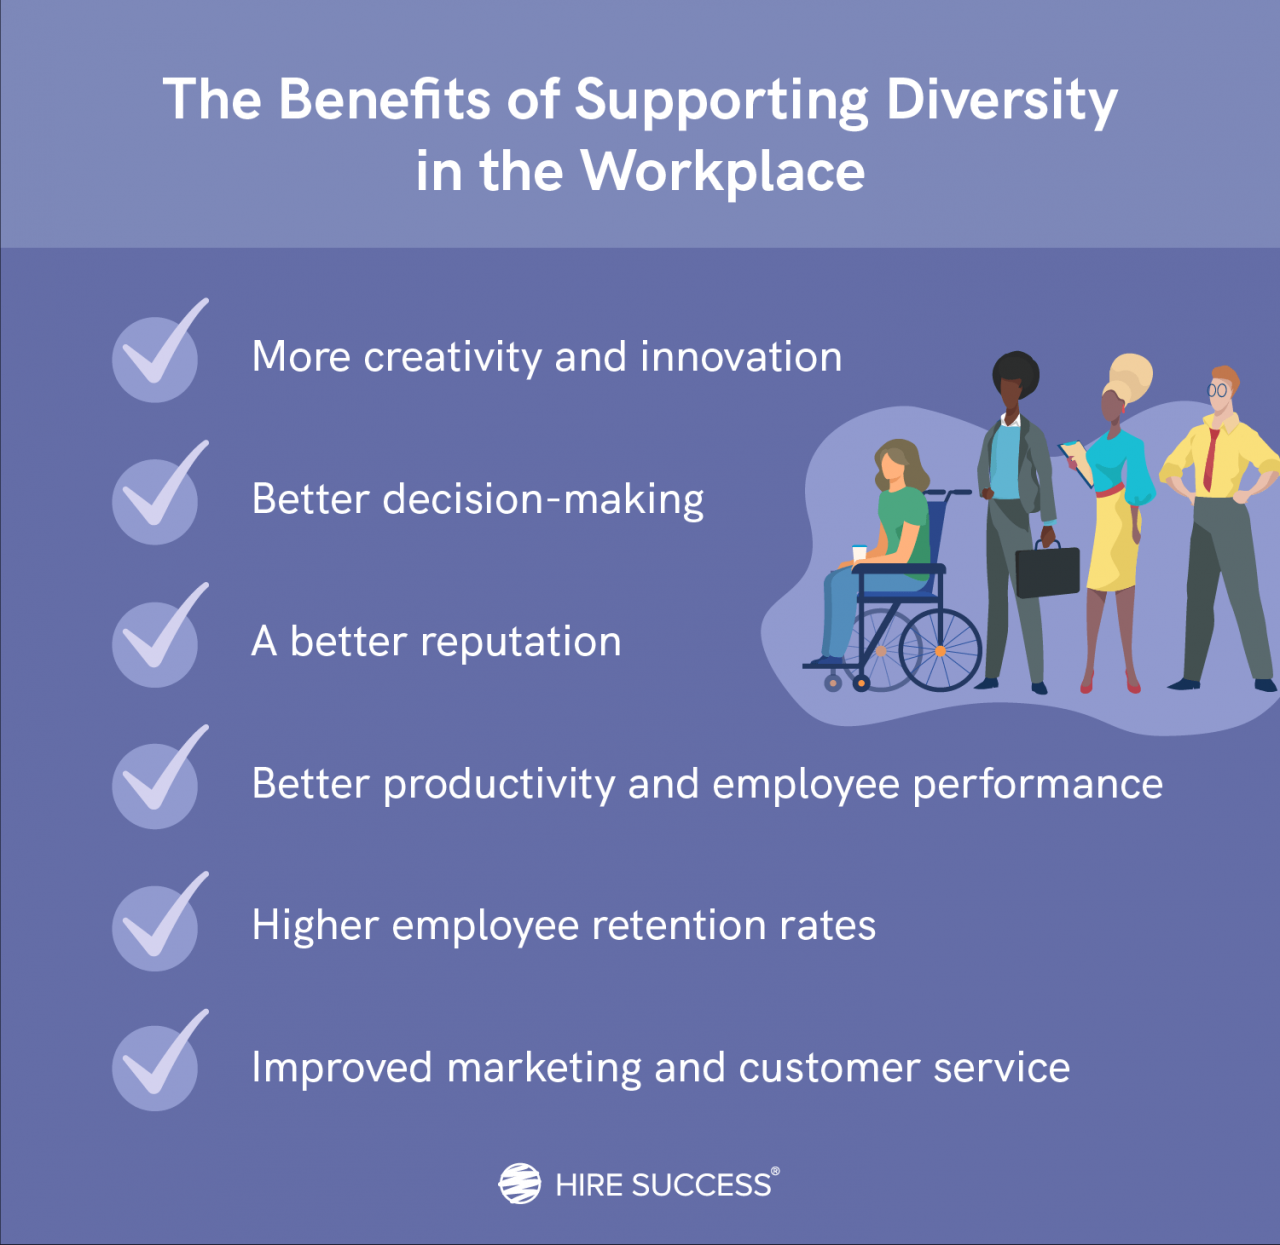 An advantage for a company having organizational diversity is that: